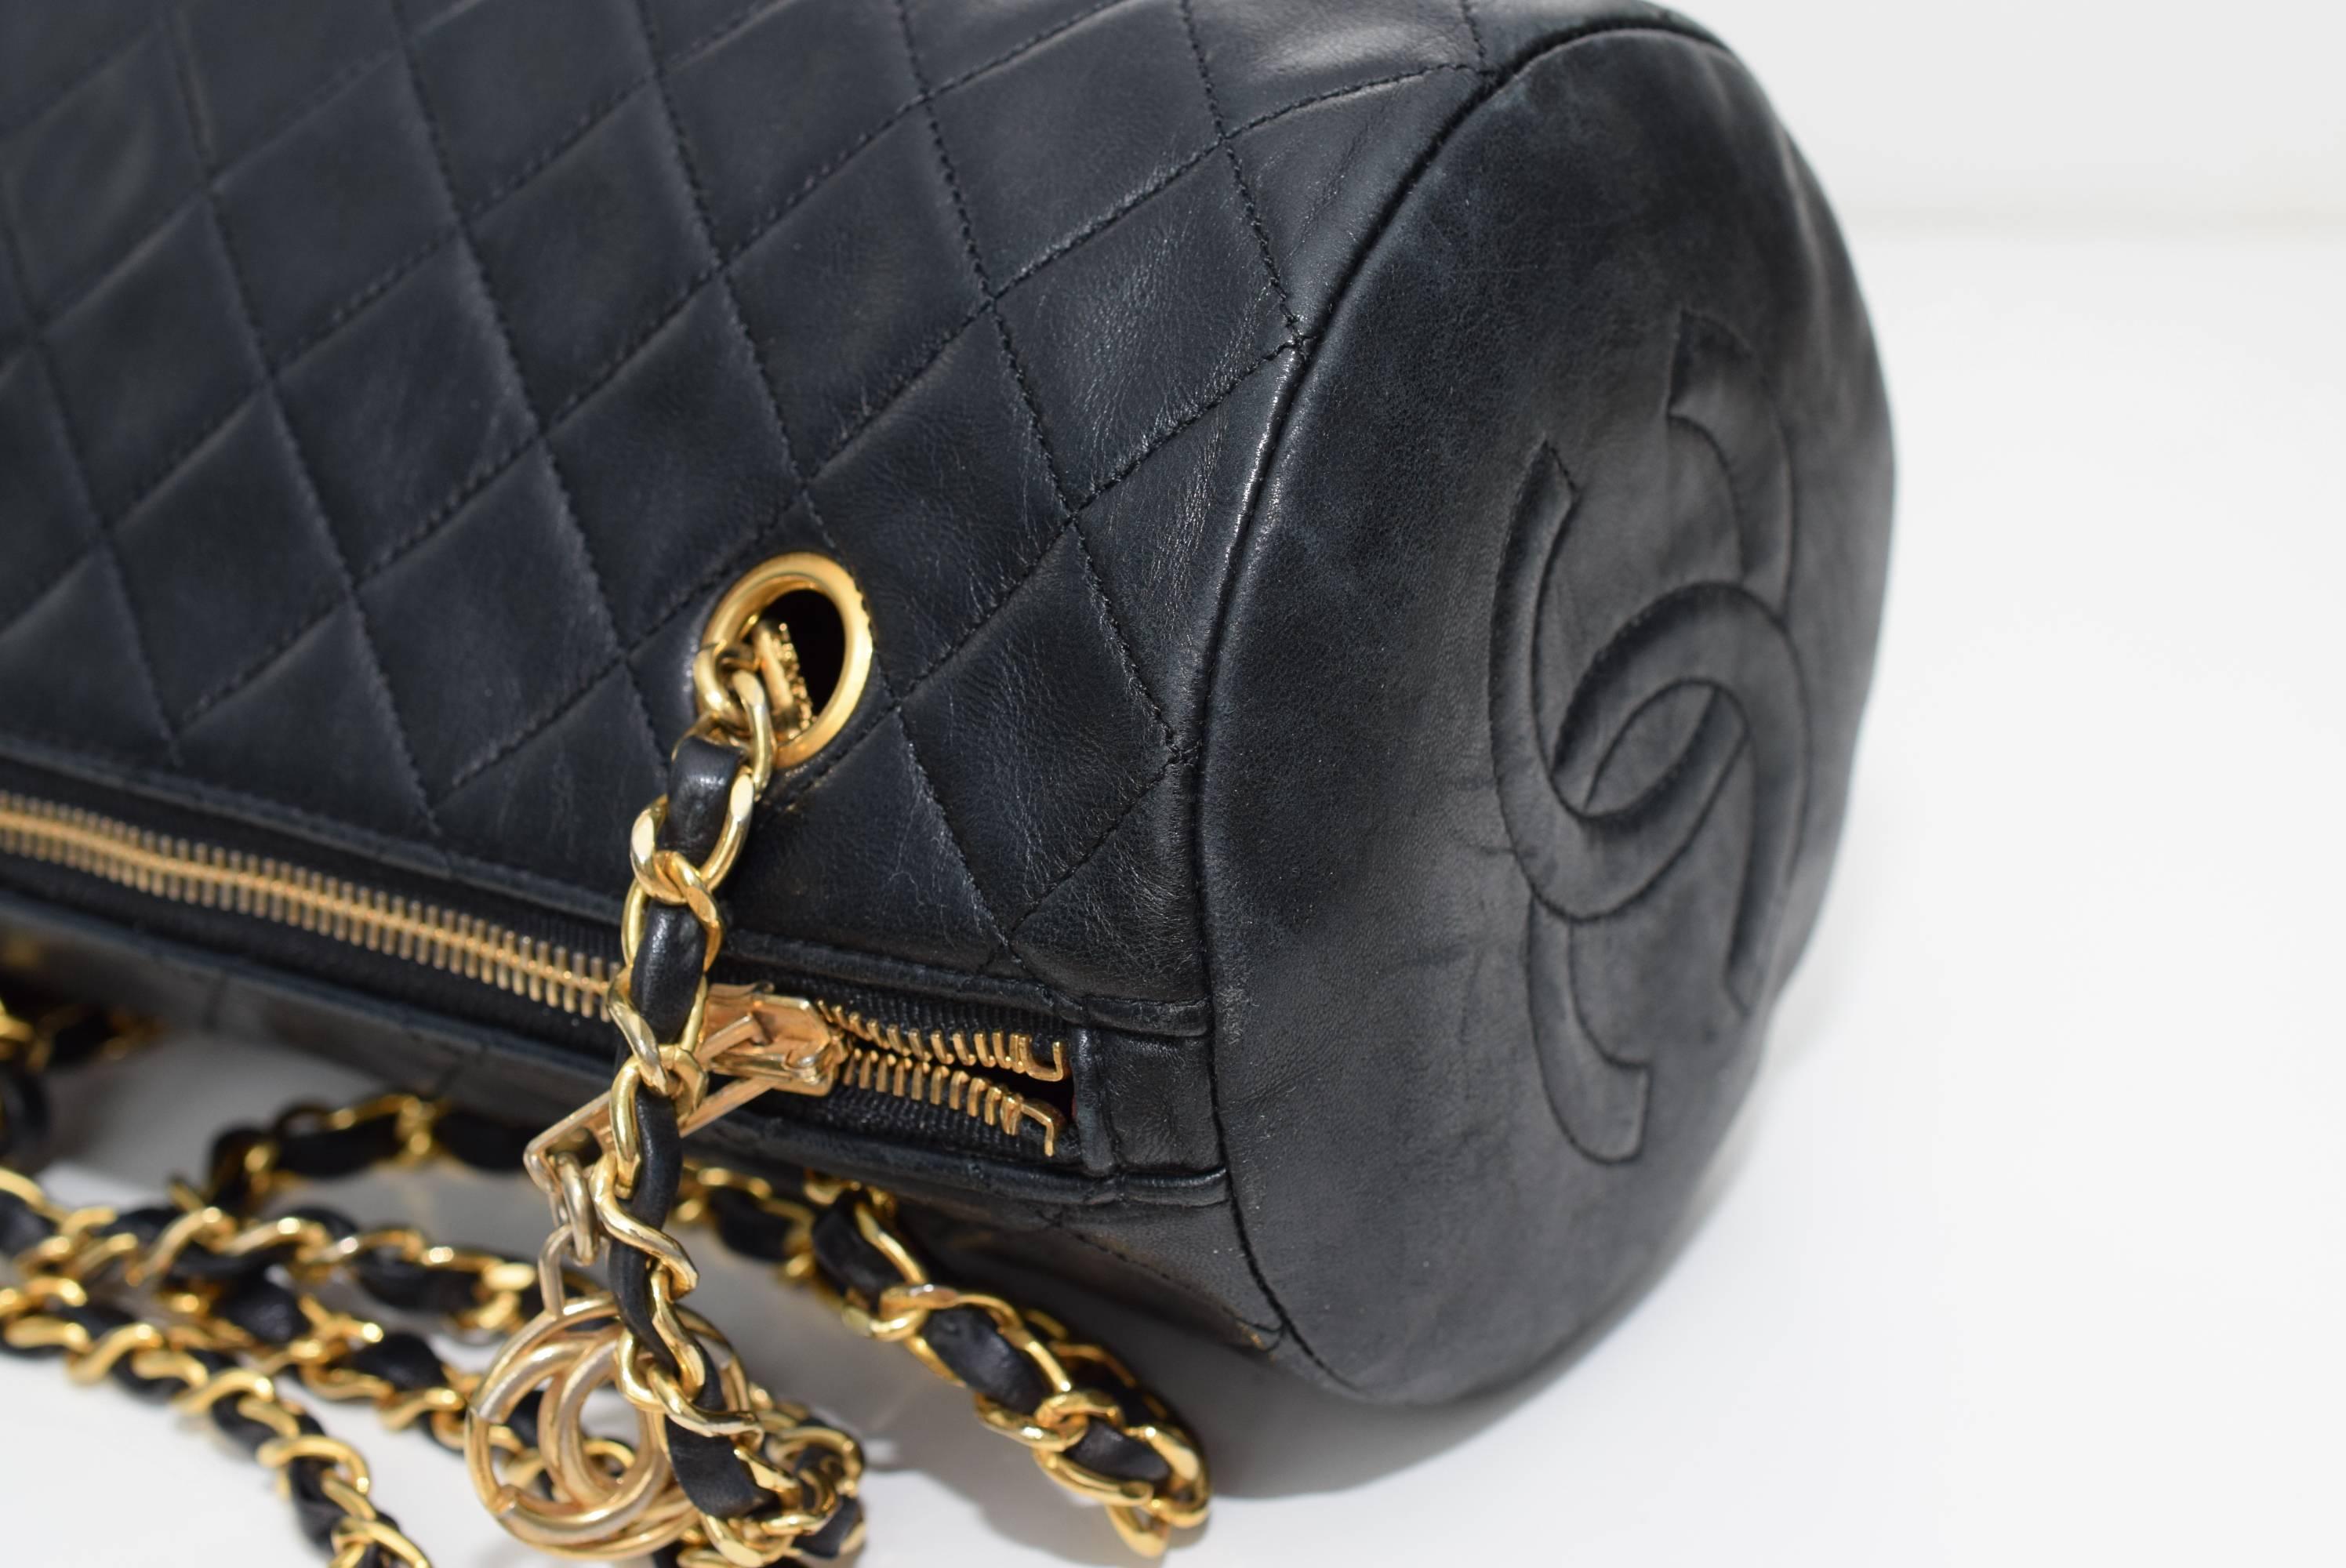 Authentic Vintage Chanel Quilted Chain Cylinder Papillon Shoulder barrel Bag. This bag is in great condition. It comes with original guarantee card and Chanel dust bag. Overall very nice and vintage condition. Inside is in mint condition with one